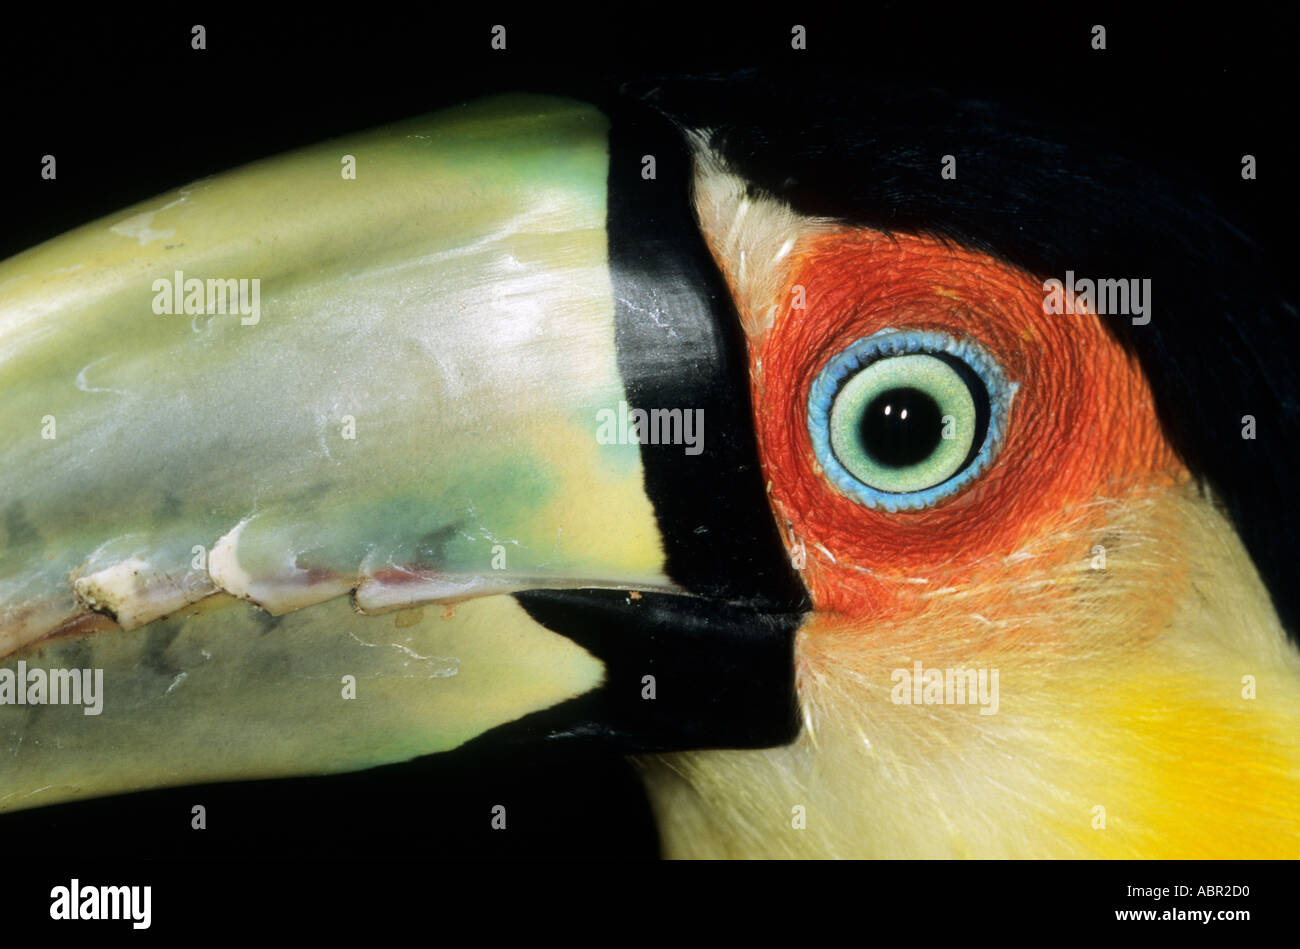 Amazon, Brazil. Close-up of the eye and upper beak of a red-breasted toucan (Ramphastos dicolorus). Stock Photo